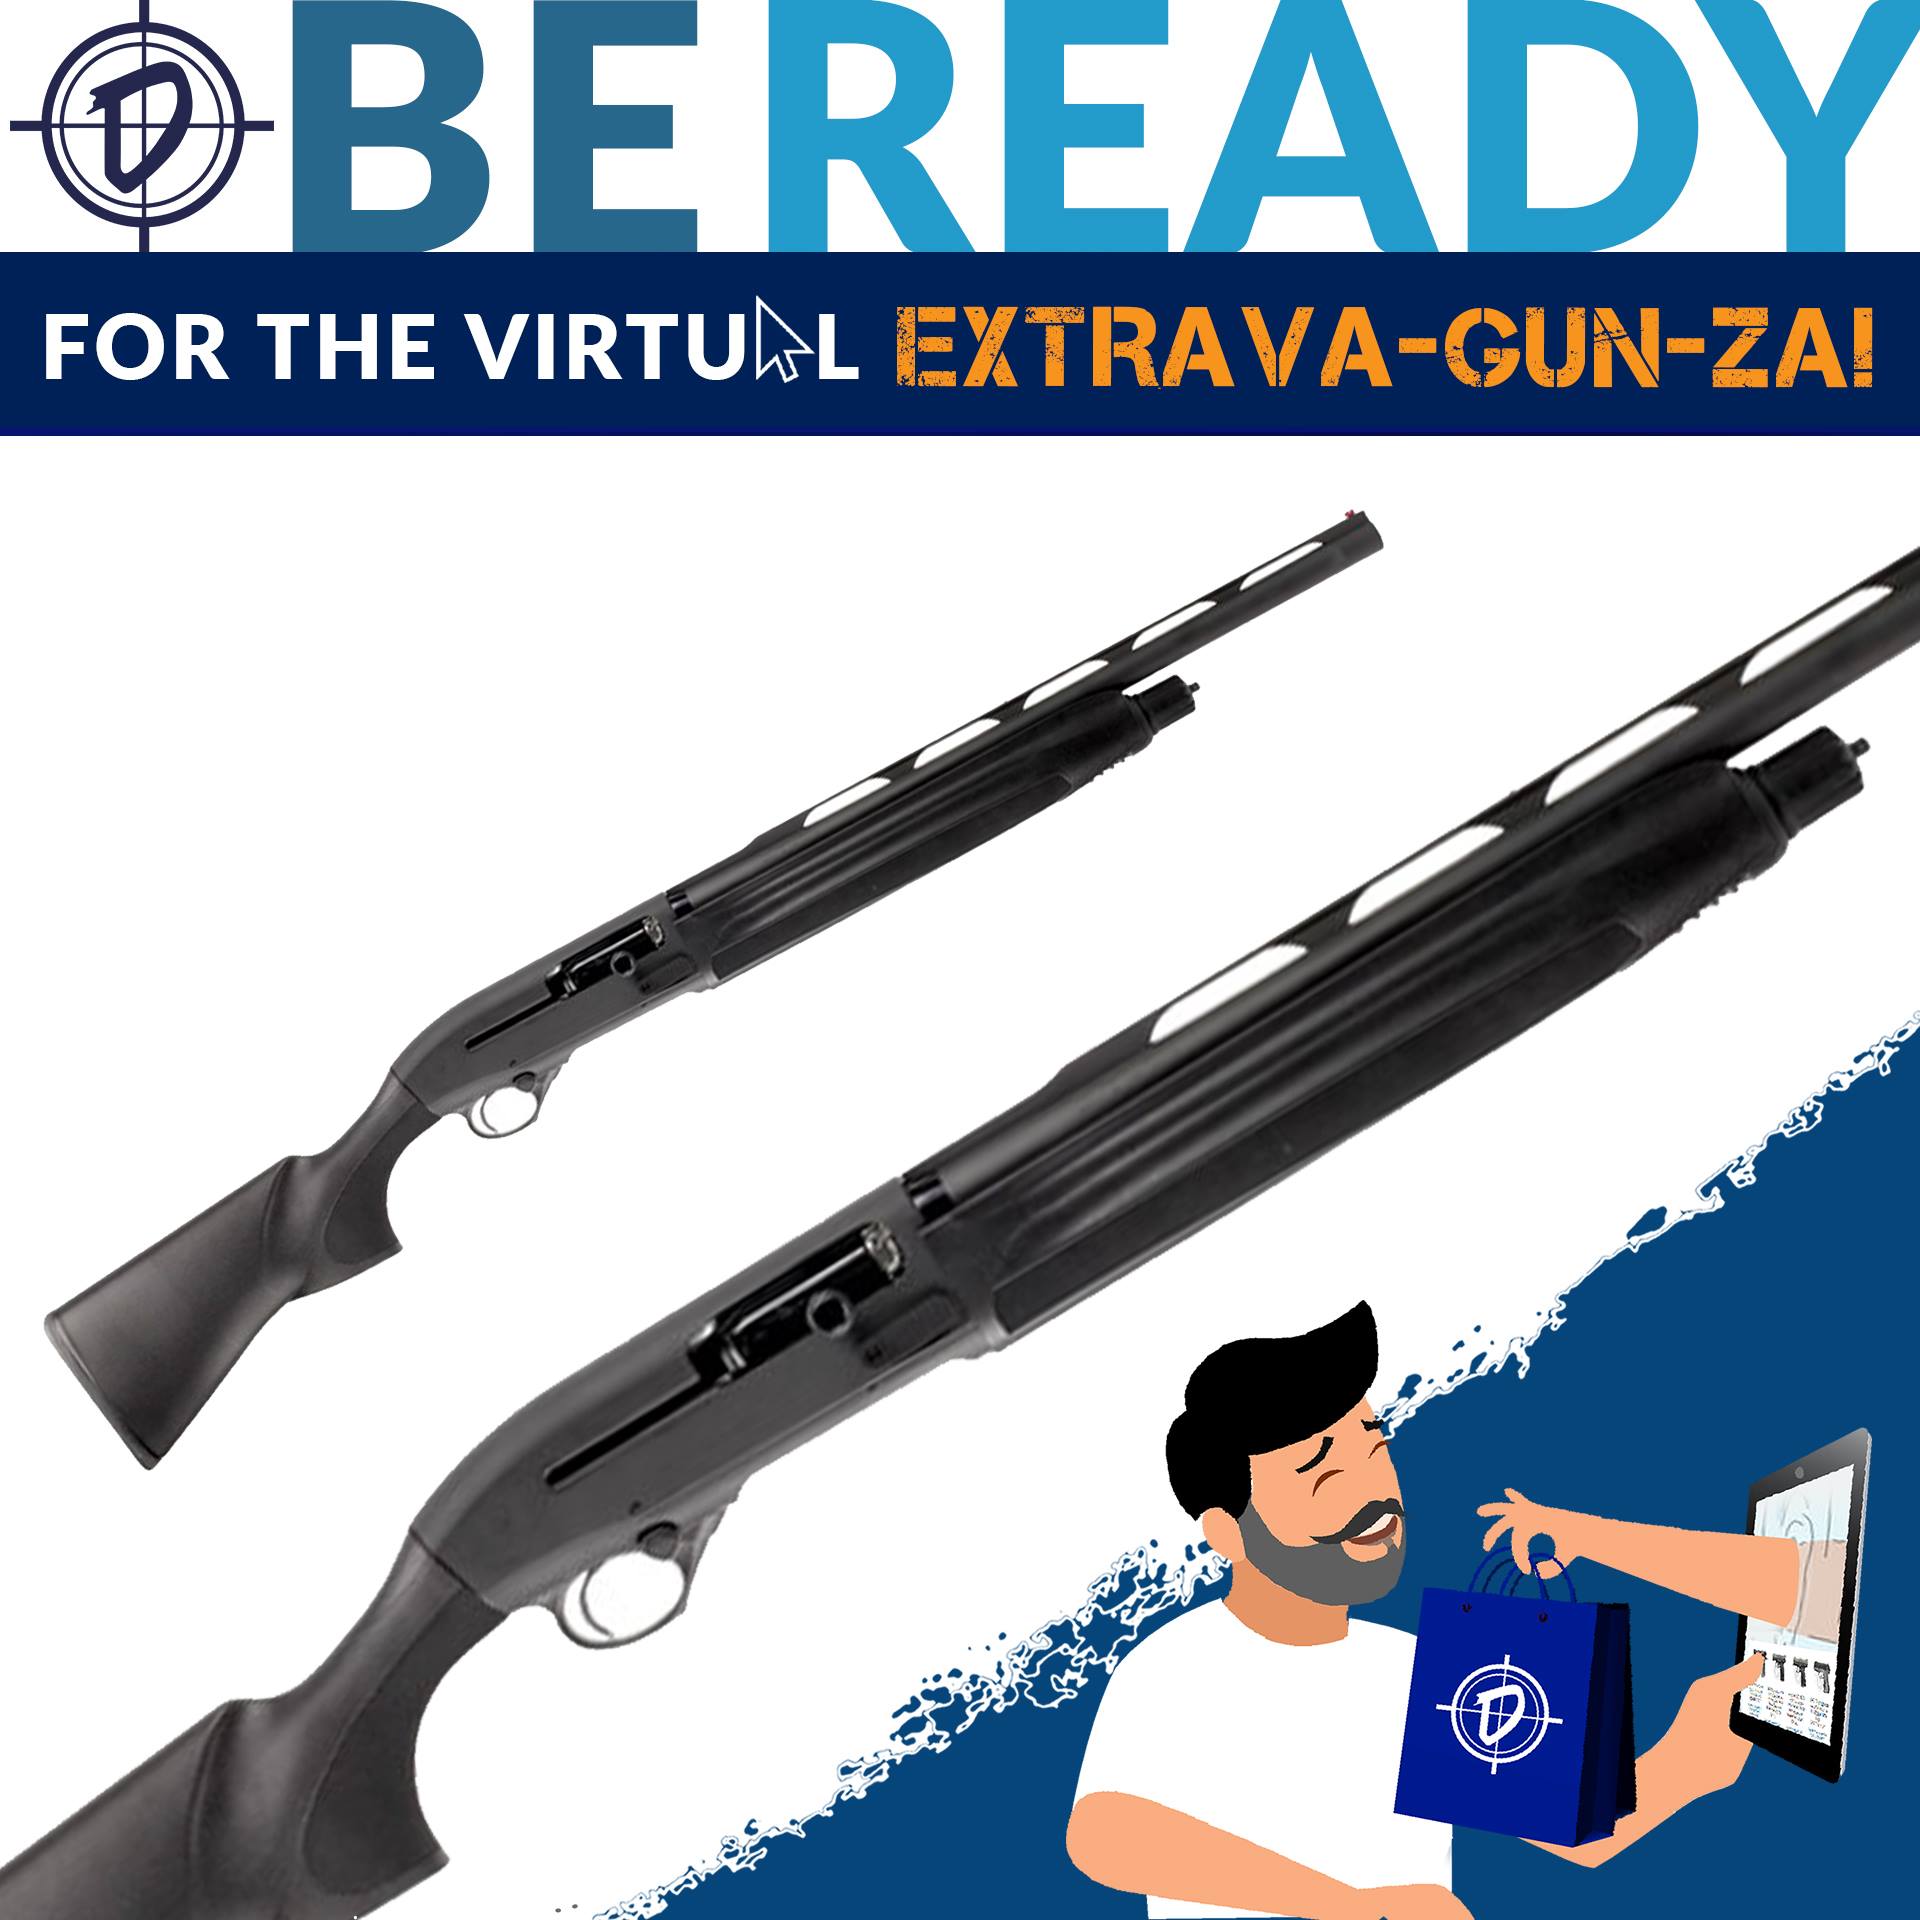 Are you ready for P.B.Dionisio & Co.'s Virtual Extrava-Gun-Za Event! From July 9 to July 13, join us for an online event. We're going through an unprecedented time. Count on P.B.Dionisio & Co. to help you be ready to defend, to protect and to win. 